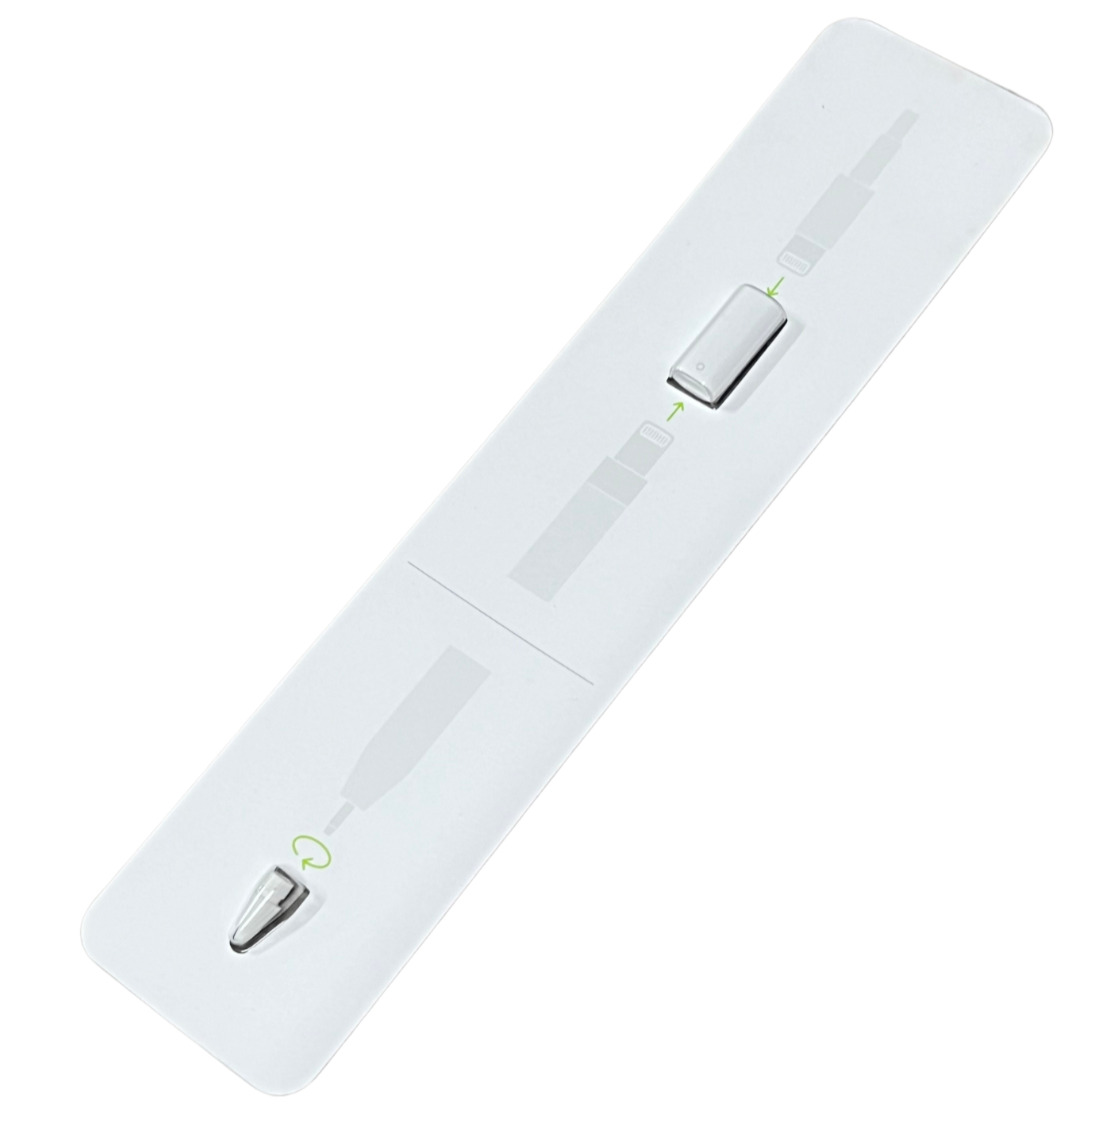 ORIGINAL OEM Apple Pencil Replacement Tip & Lightning Cable Charging Adapter